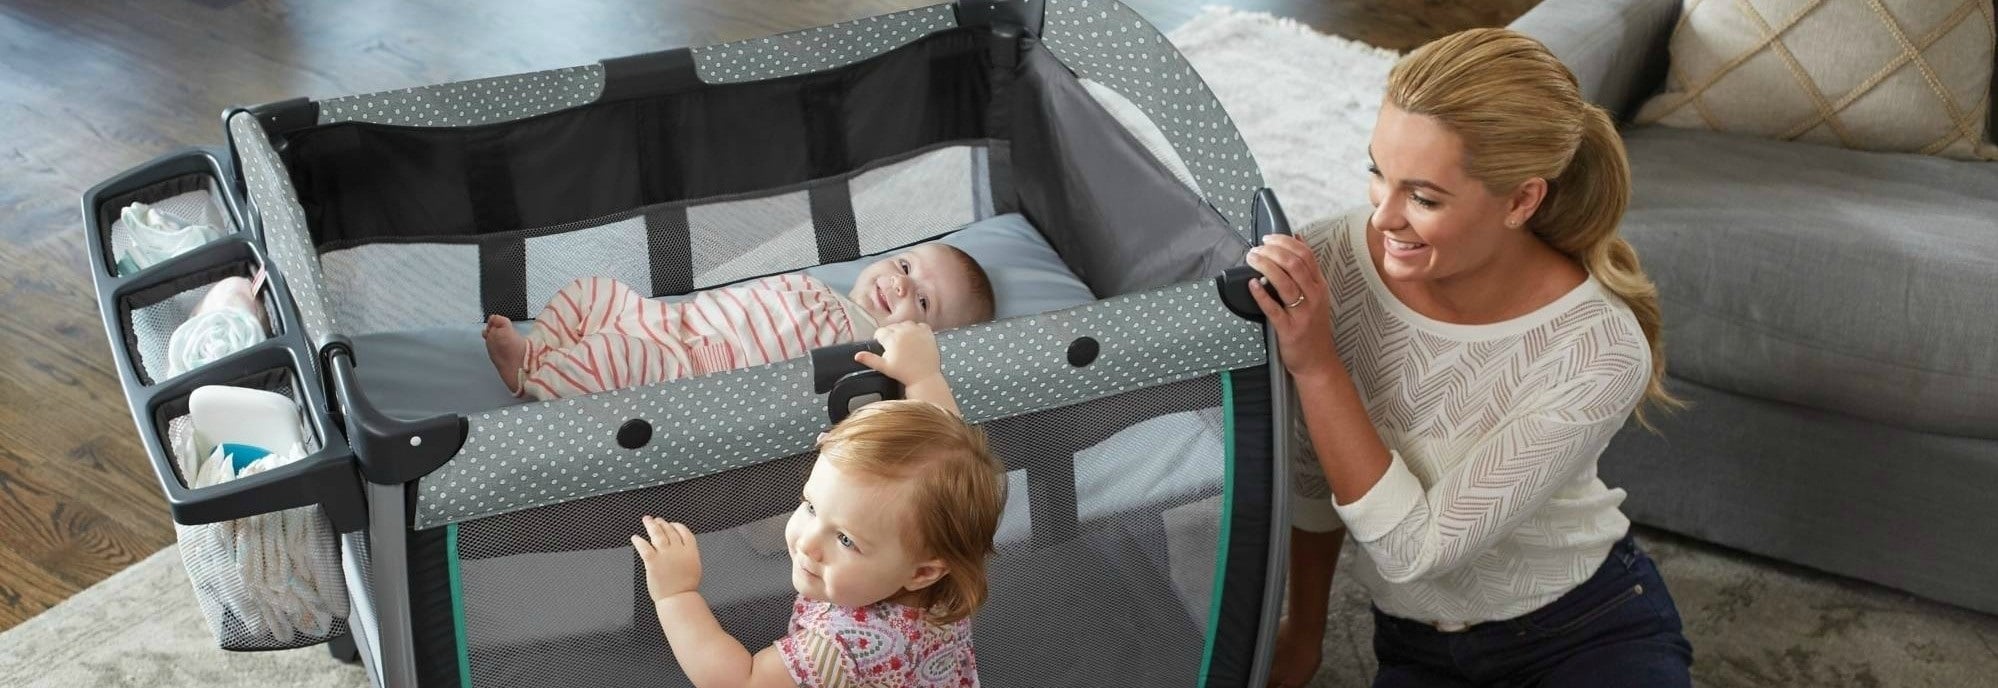 best mattress for graco pack and play